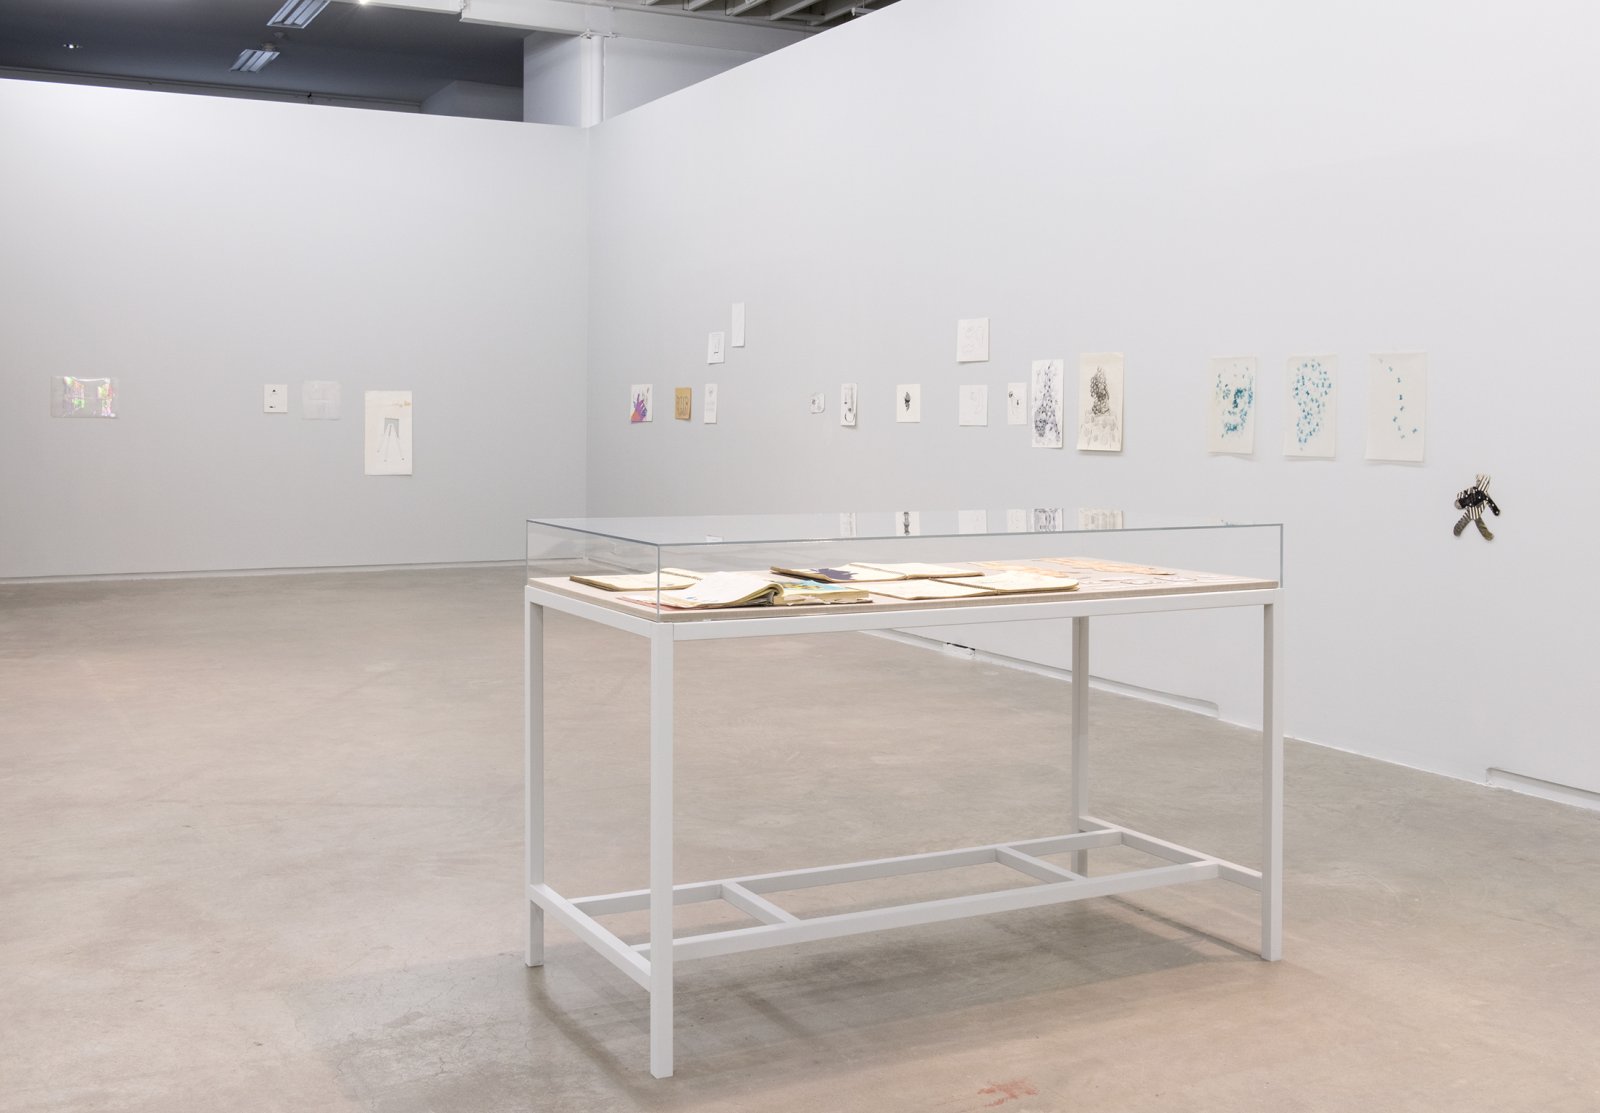 Jerry Pethick, installation view, Where Sidewalks Leap On The Table, Catriona Jeffries, 2014 ​​ by Jerry Pethick